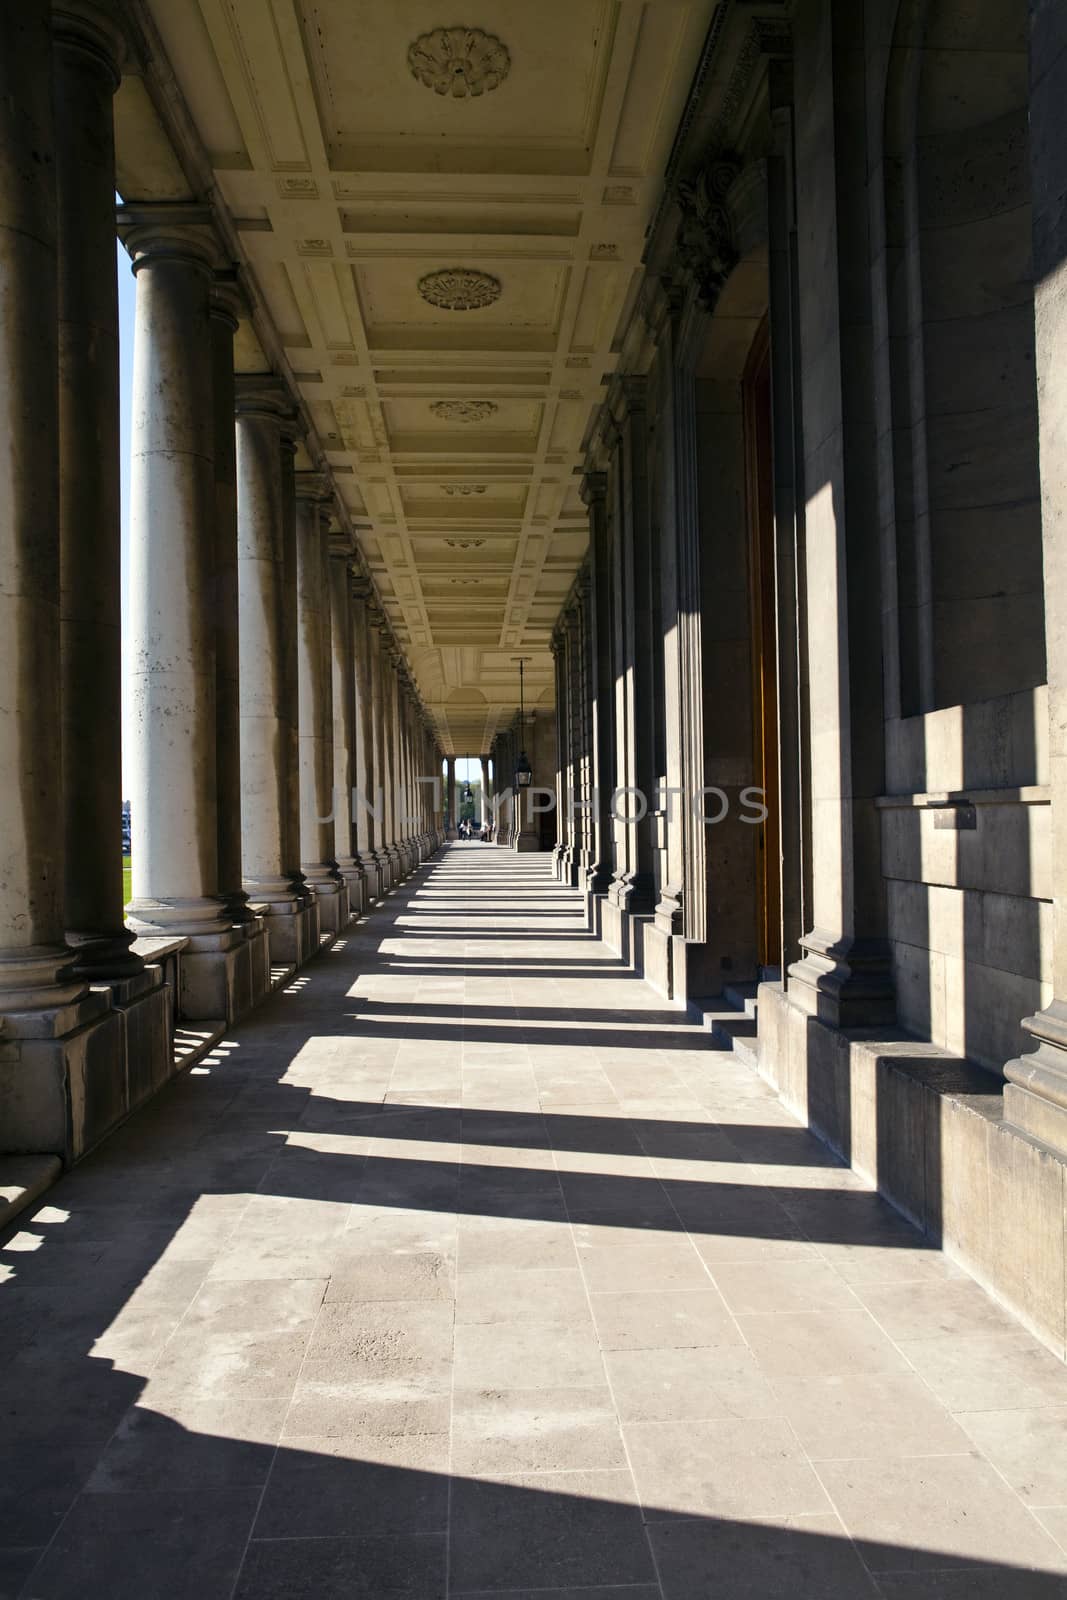 One of the walkways at the Royal Naval College in Greenwich, London.